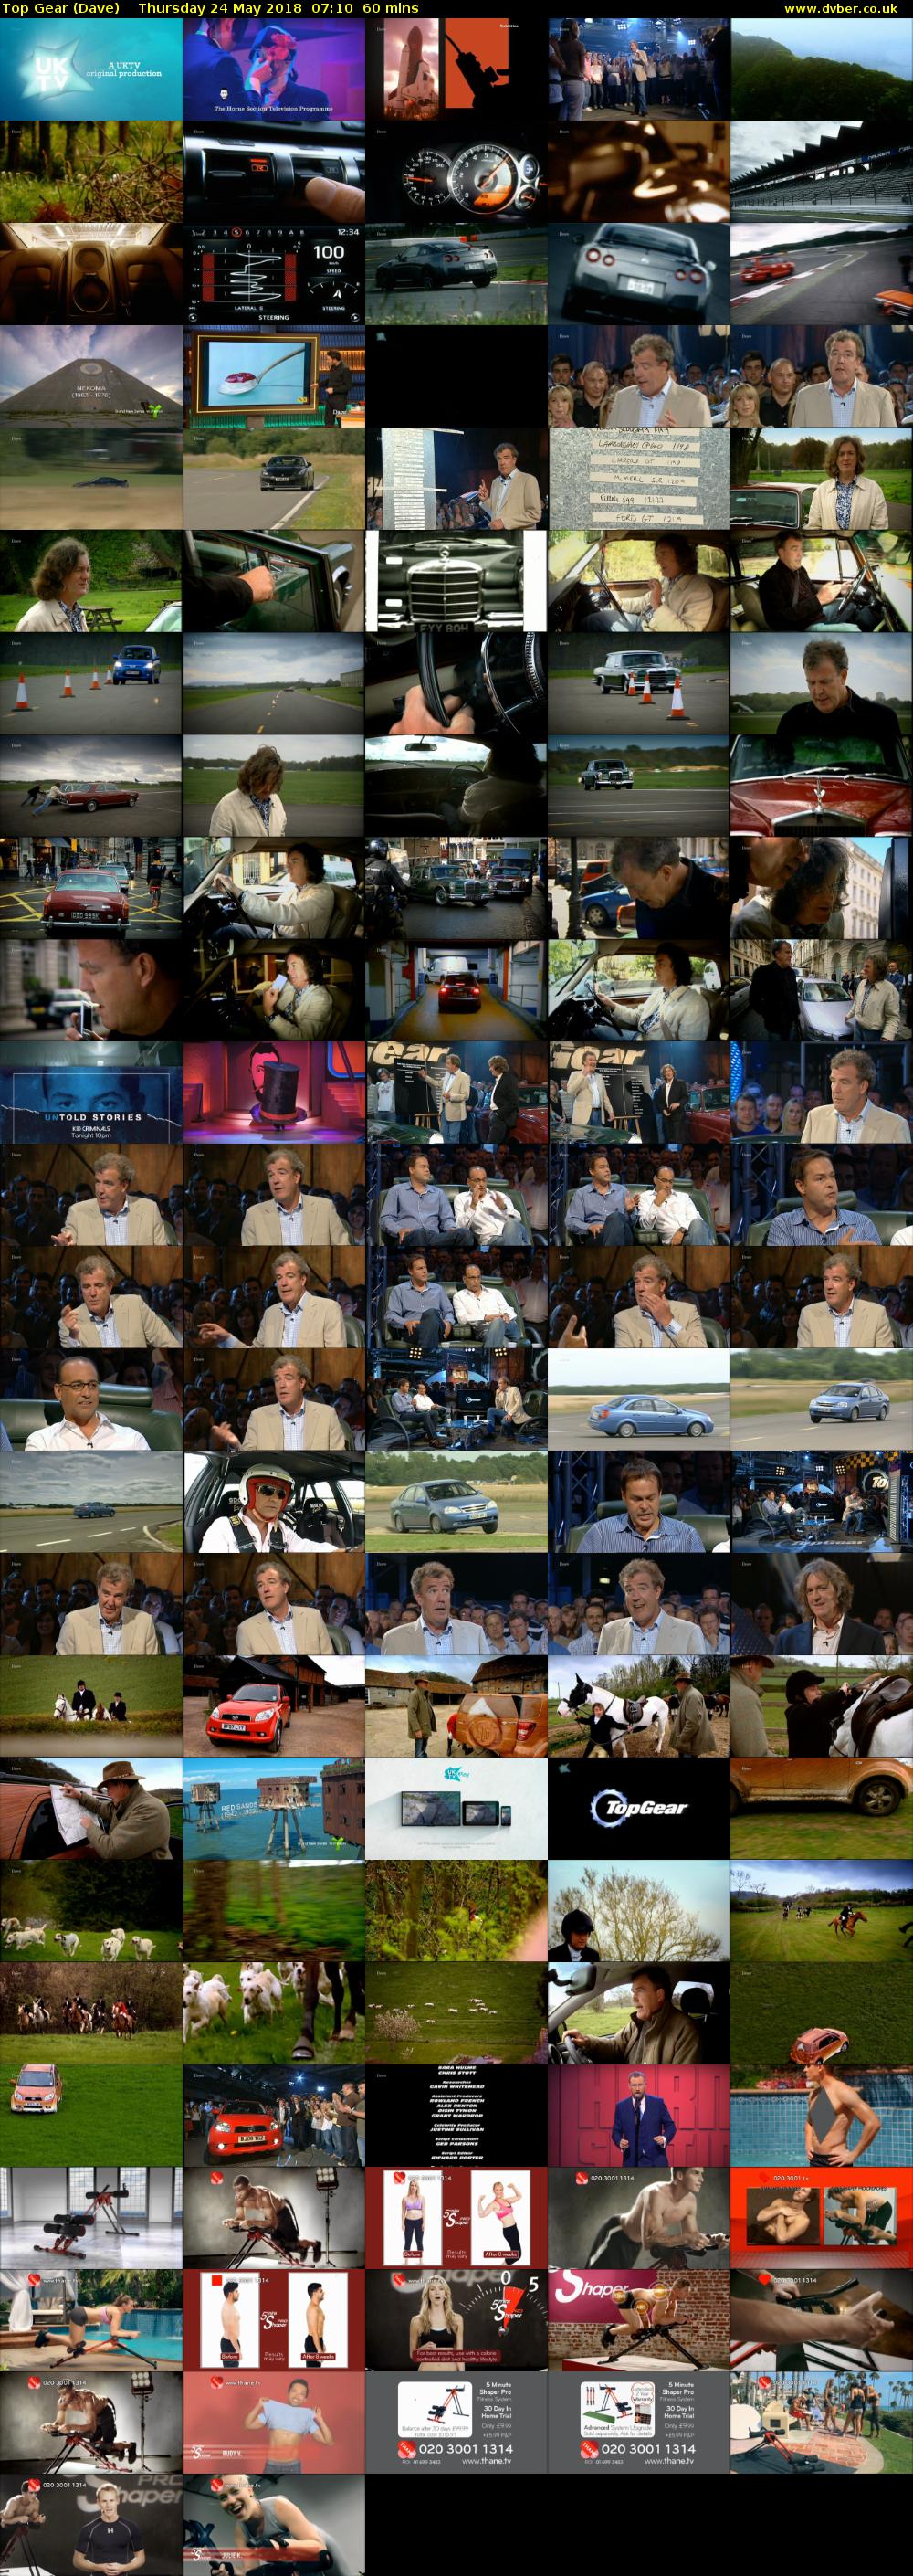 Top Gear (Dave) Thursday 24 May 2018 07:10 - 08:10